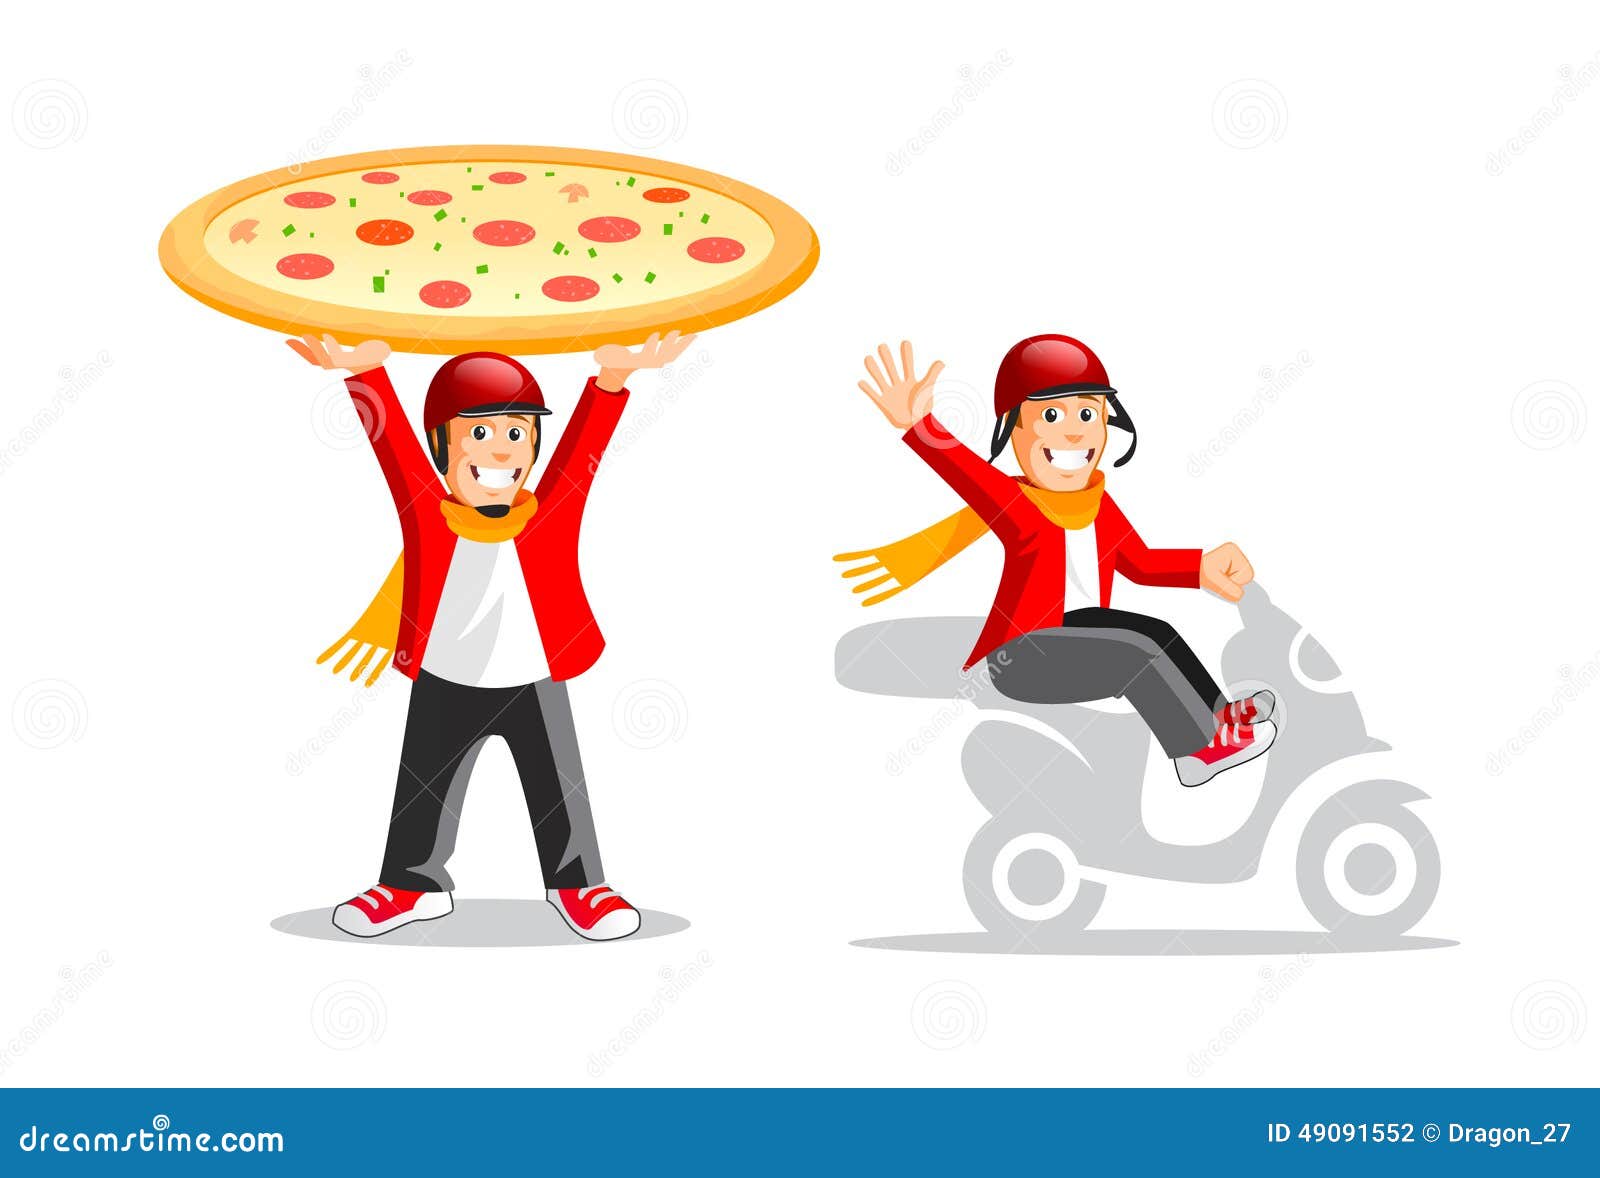 Funny Cartoon Pizza Delivery Guy Stock Vector - Illustration of pizza,  delivery: 49091552